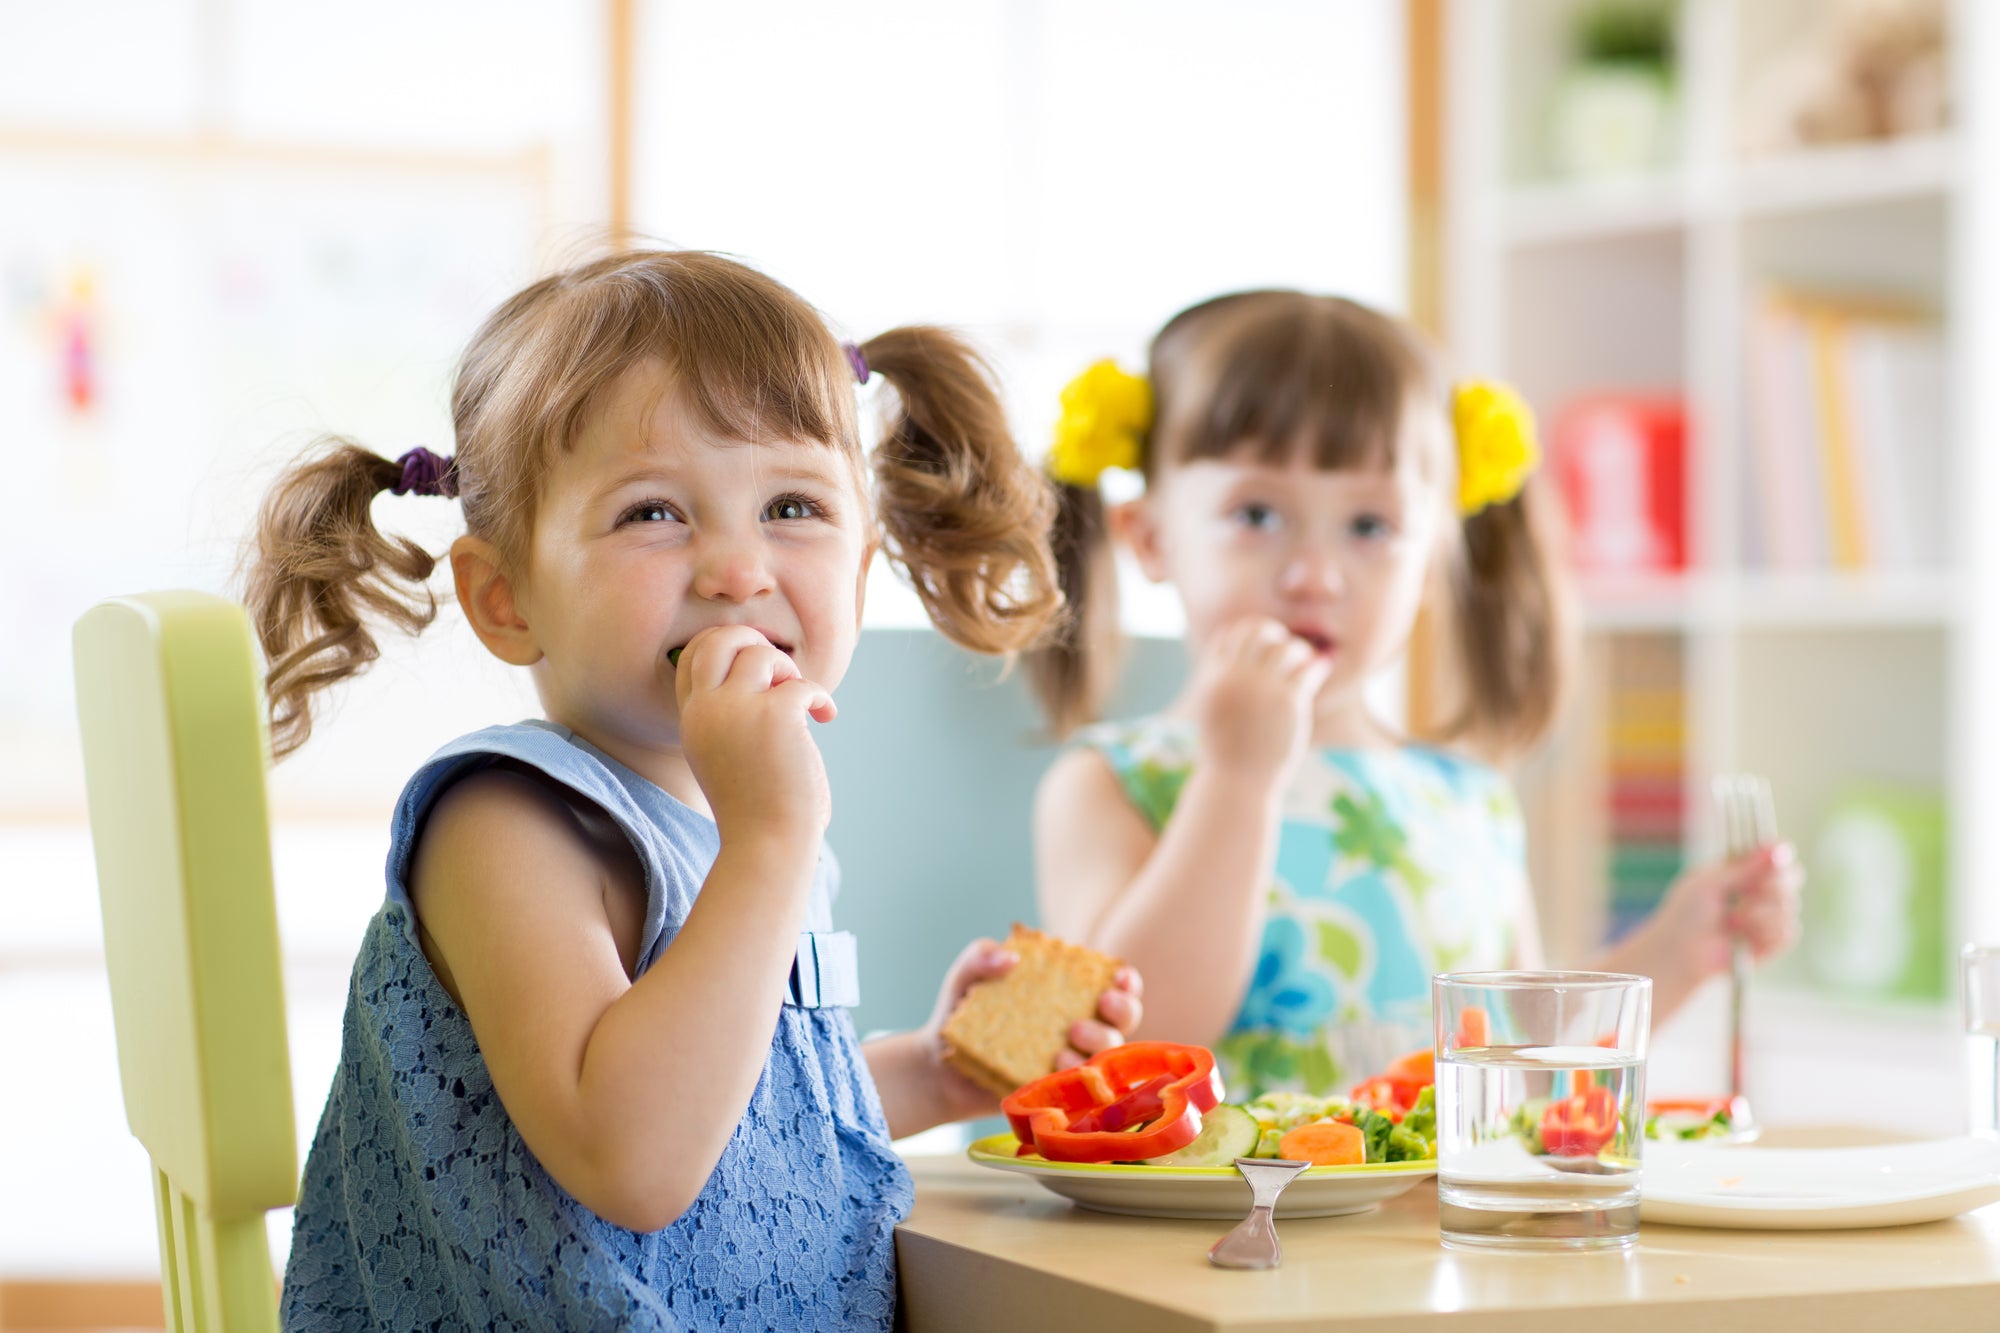 2 young girls eating 